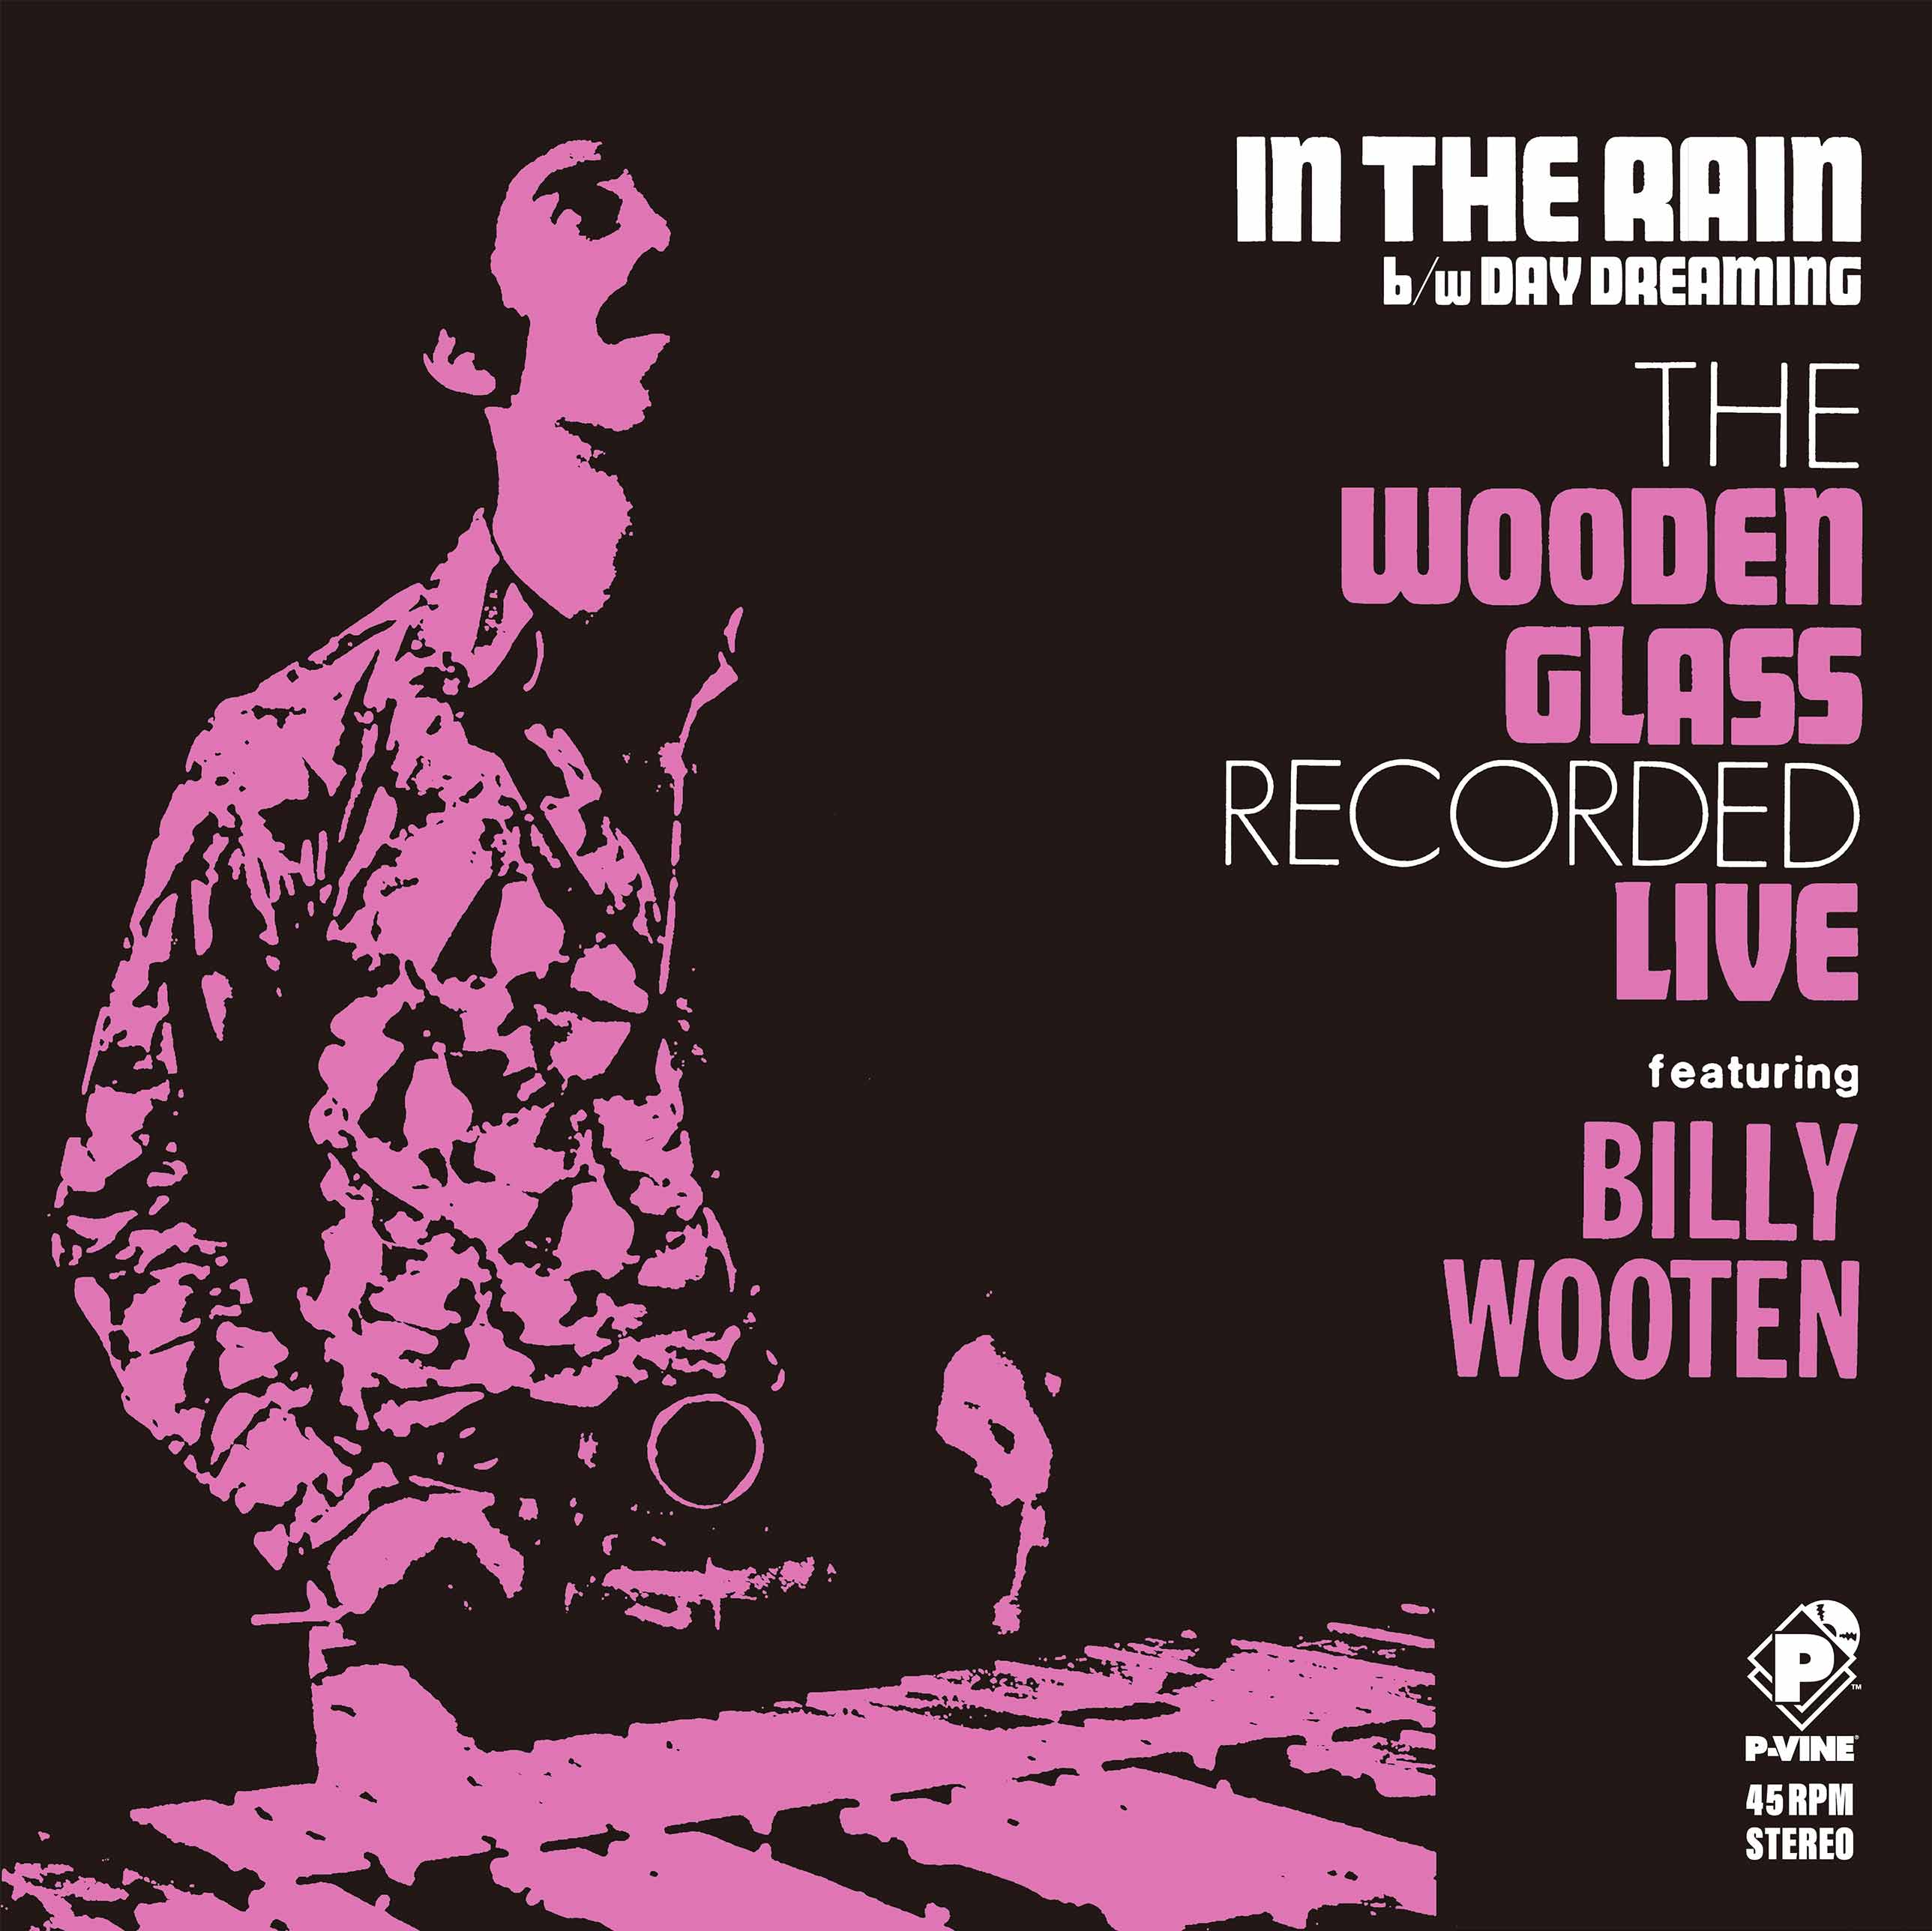 THE WOODEN GLASS featuring BILLY WOOTEN「In The Rain / Day Dreaming」